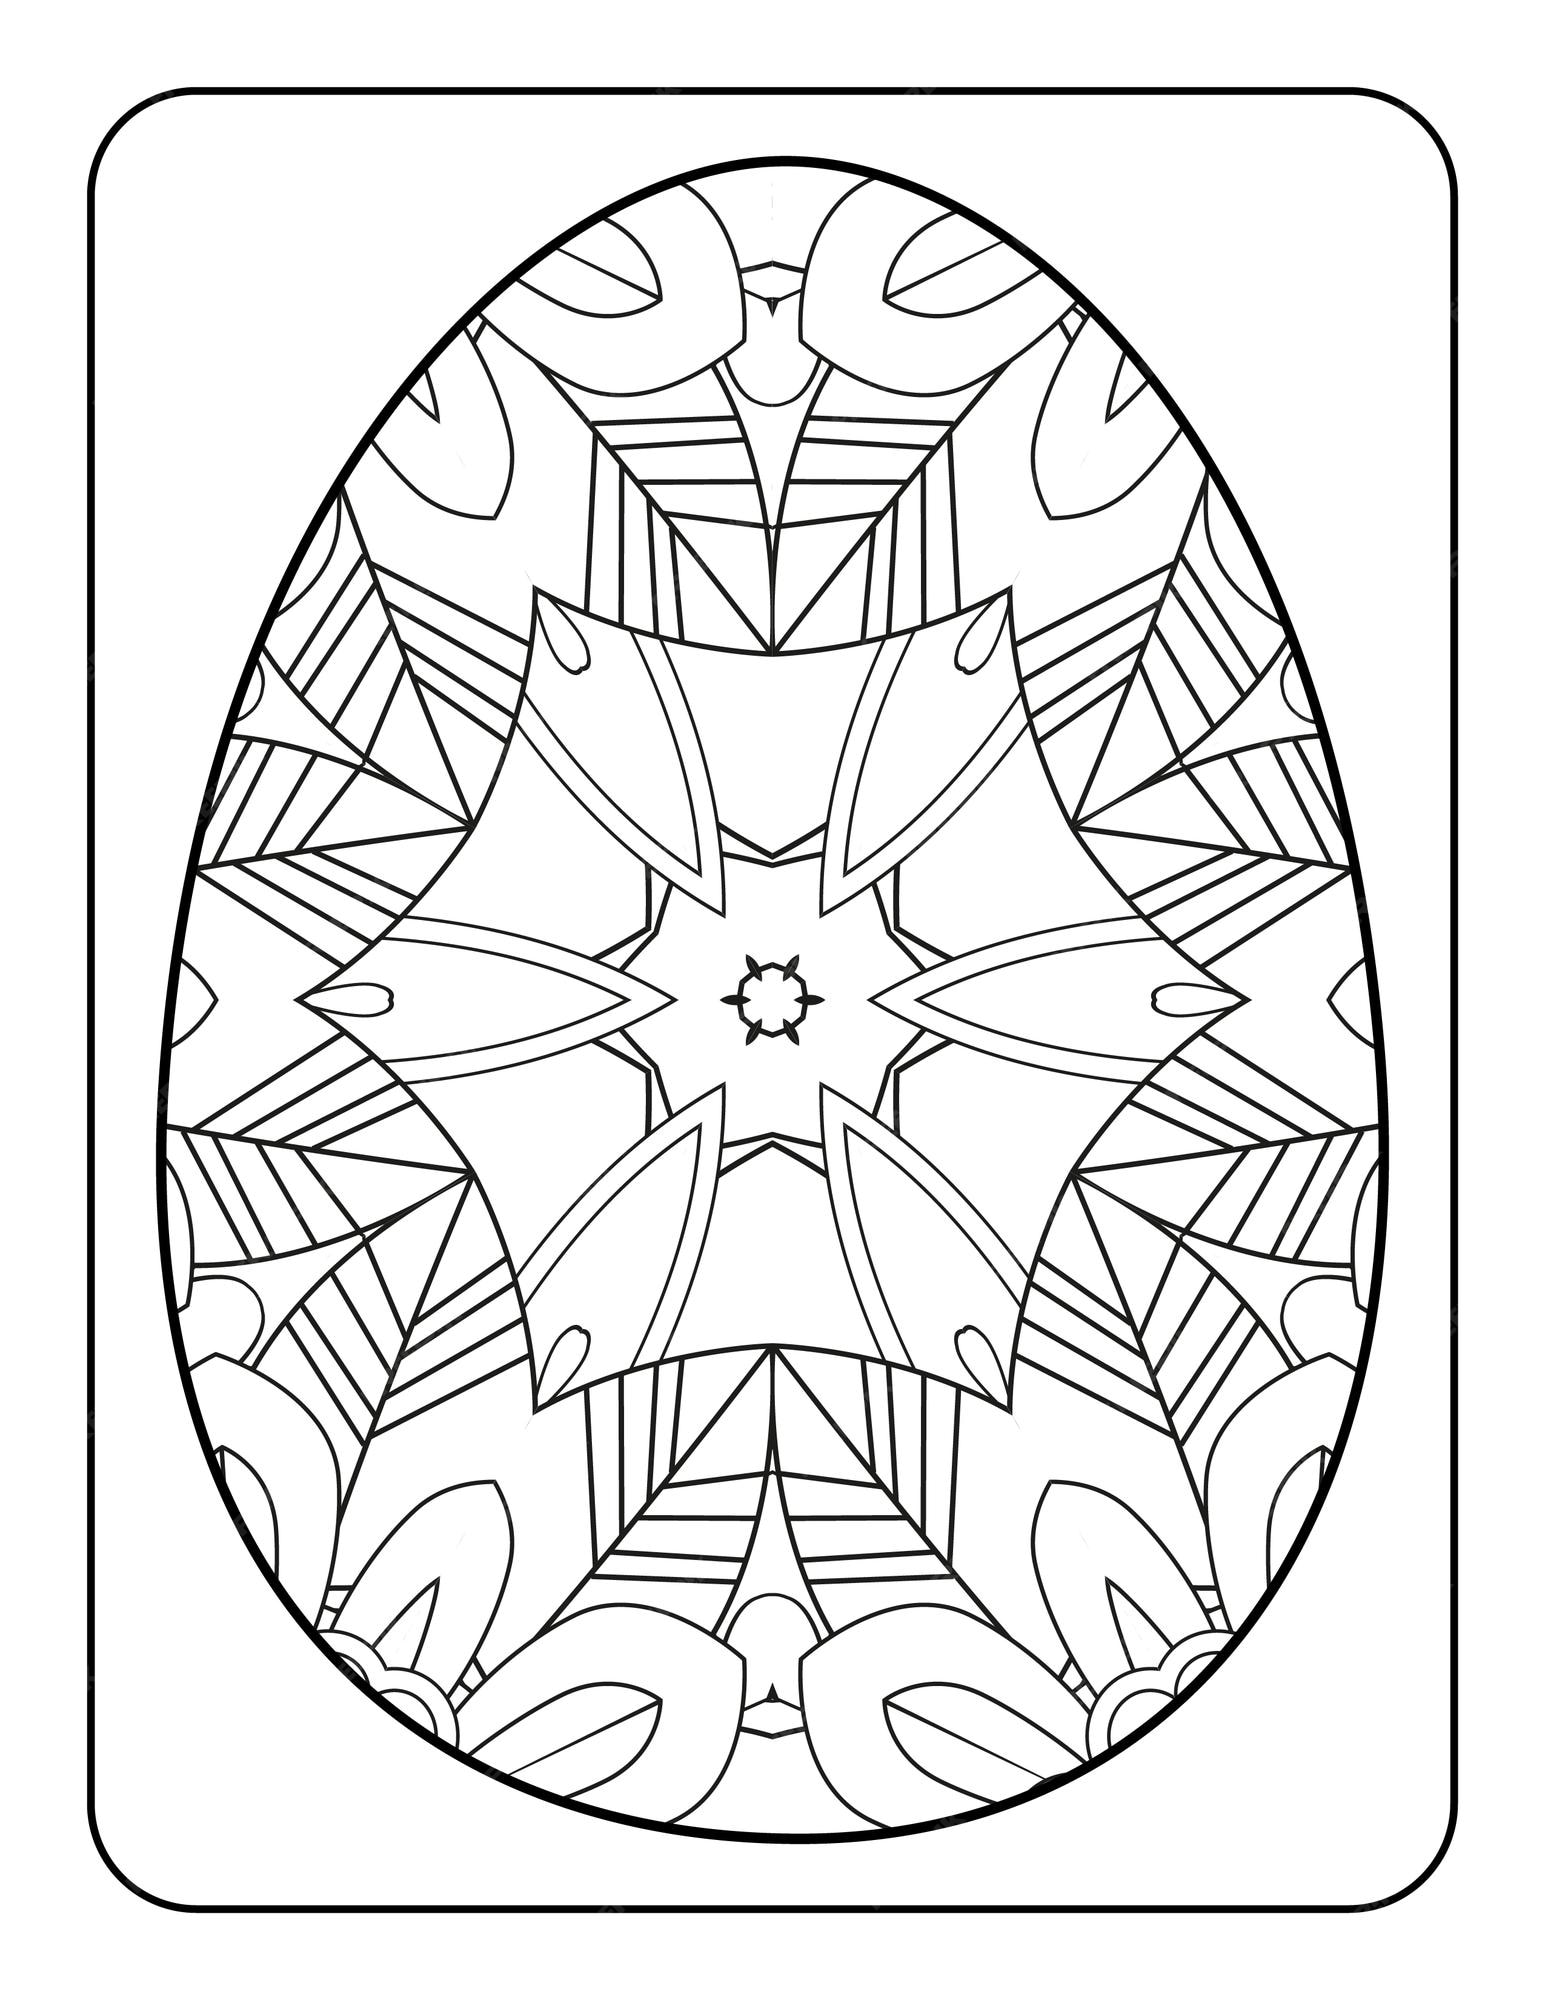 Premium vector easter egg coloring page happy easter day coloring book page coloring page for kids and adults